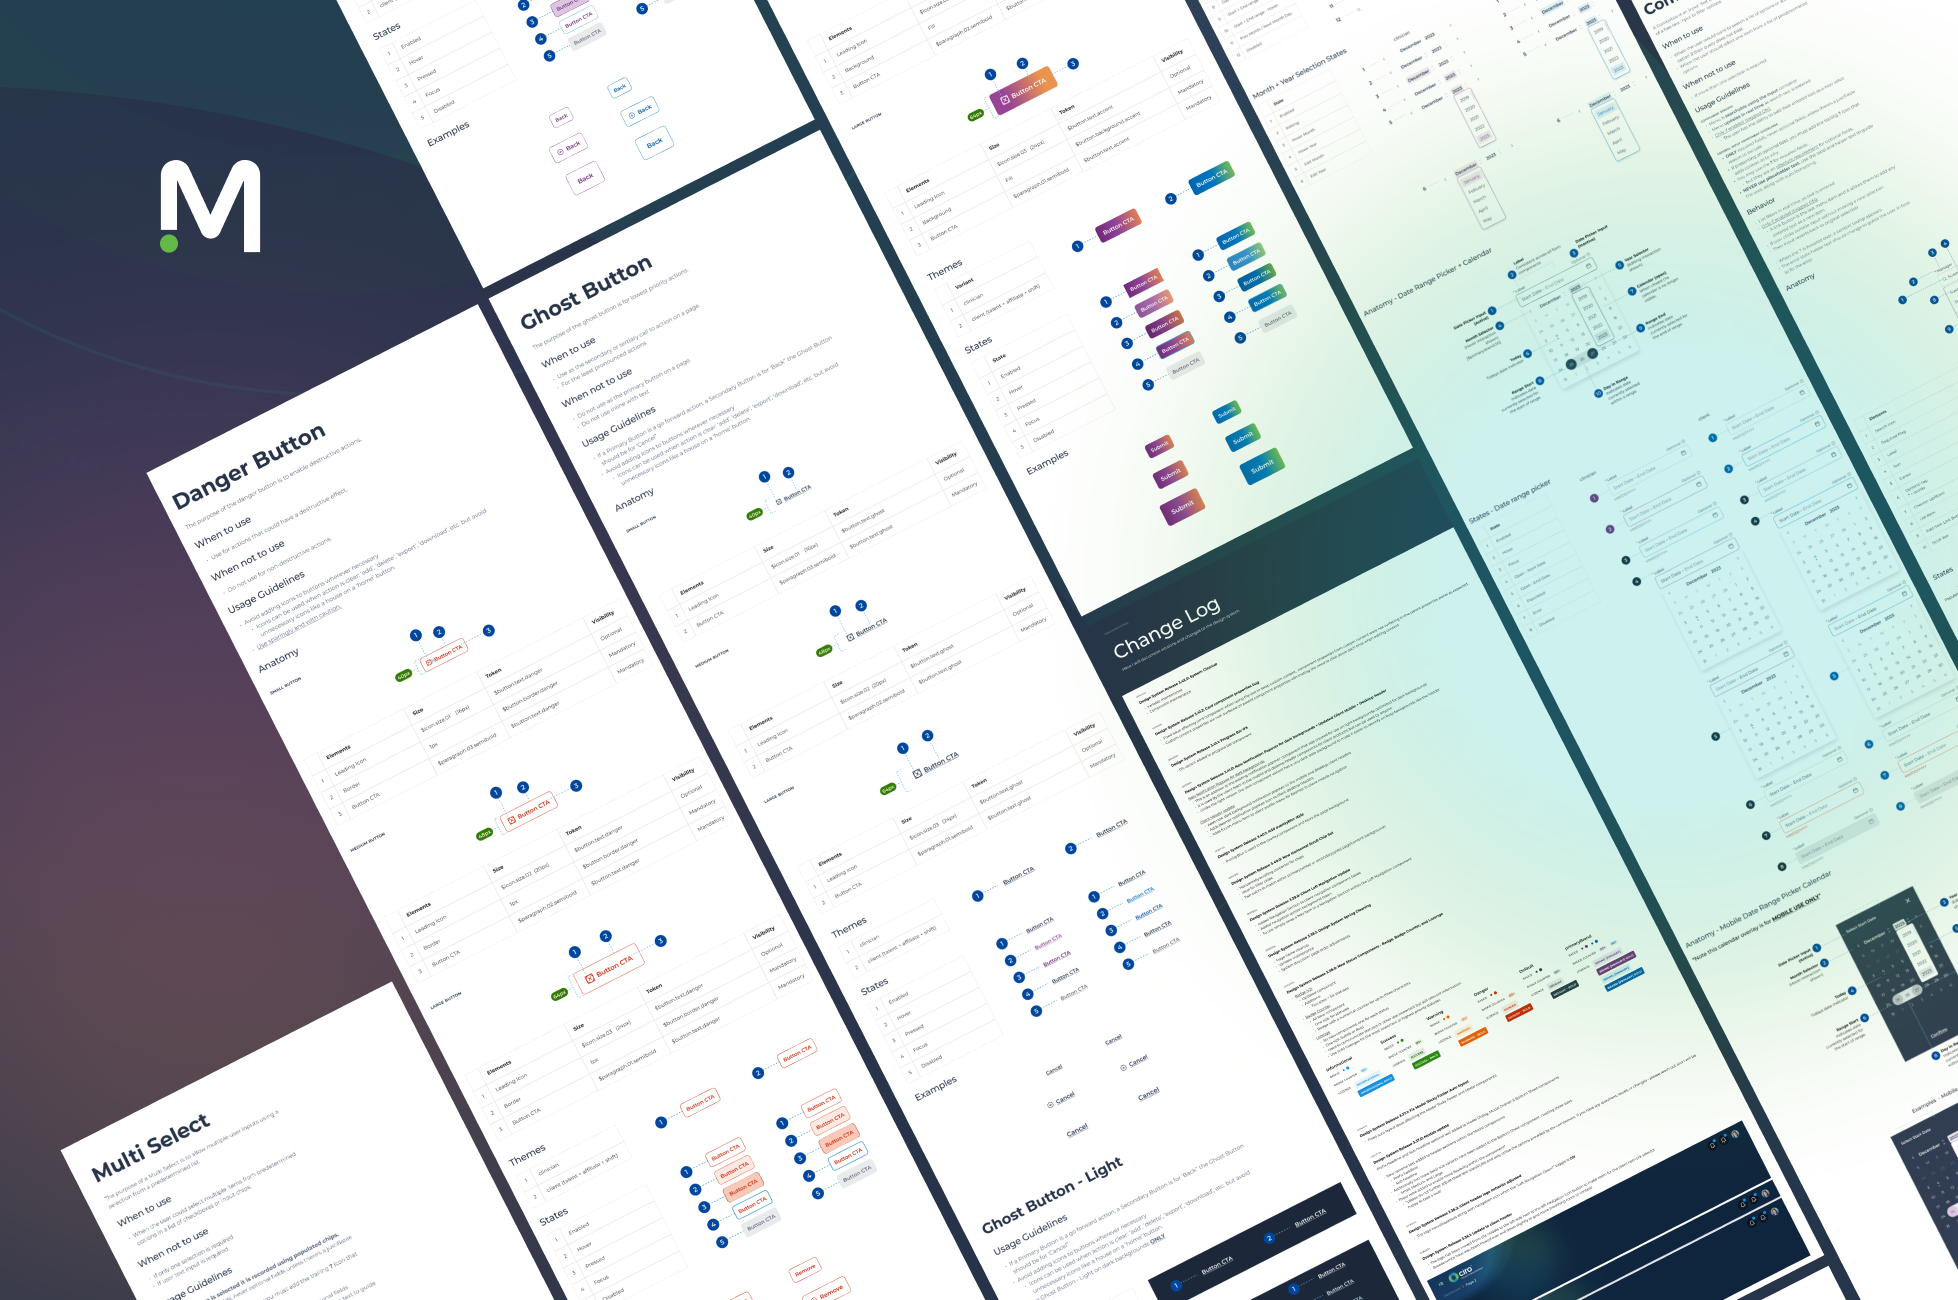 MS Design system overview